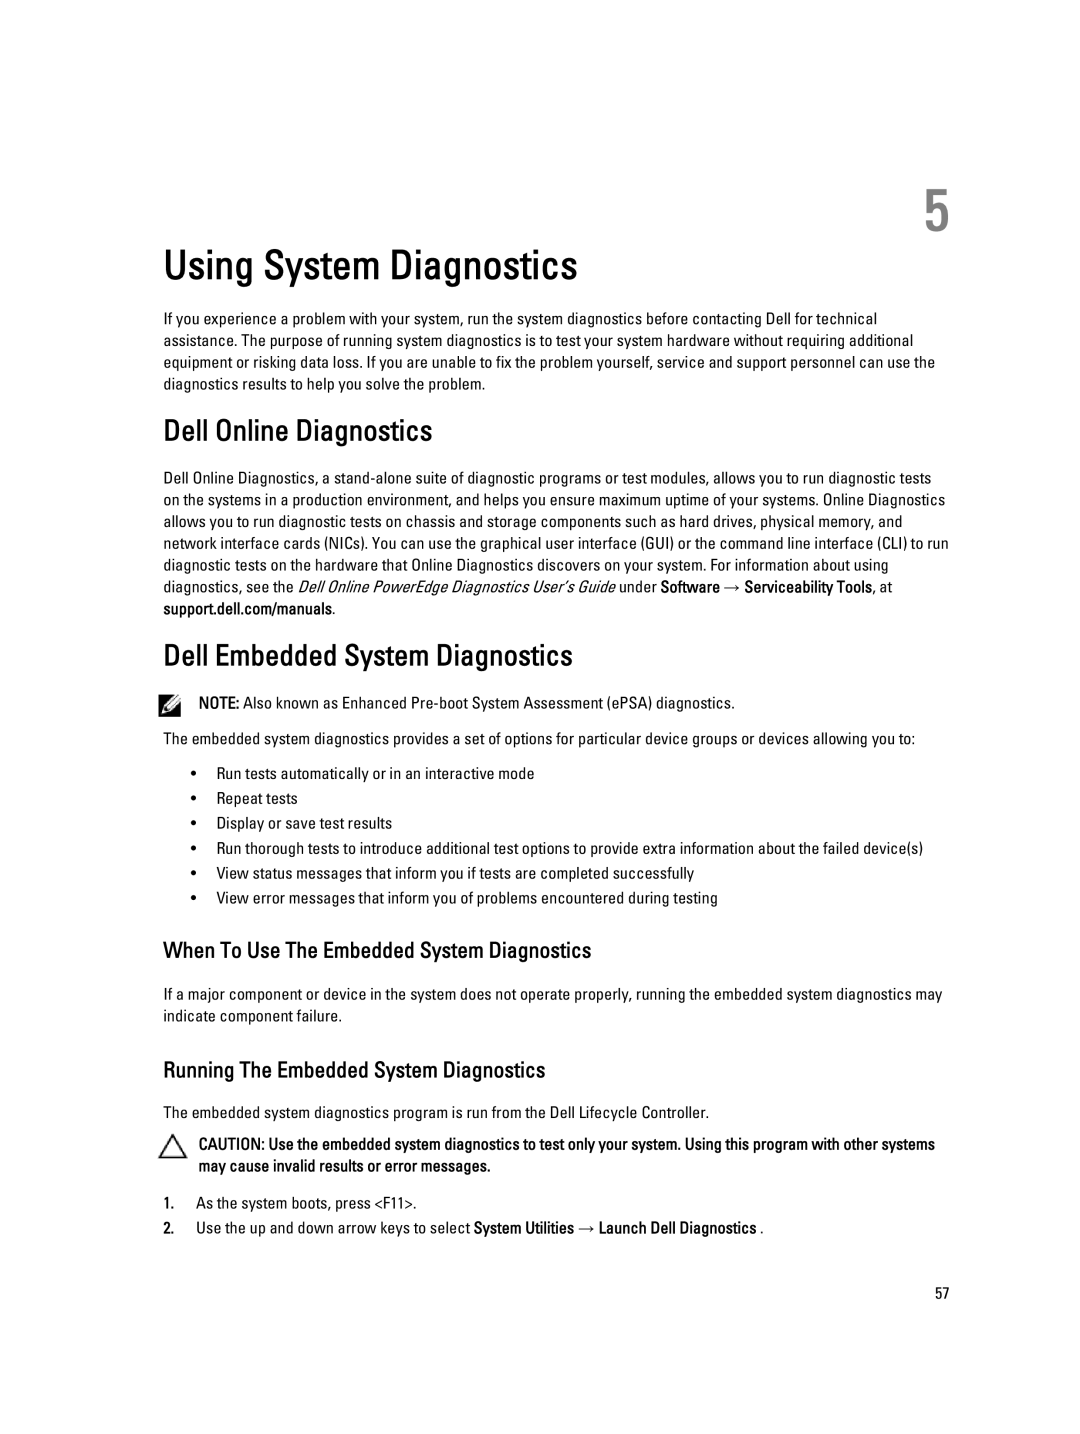 Dell QHB owner manual Dell Online Diagnostics Dell Embedded System Diagnostics, When To Use The Embedded System Diagnostics 